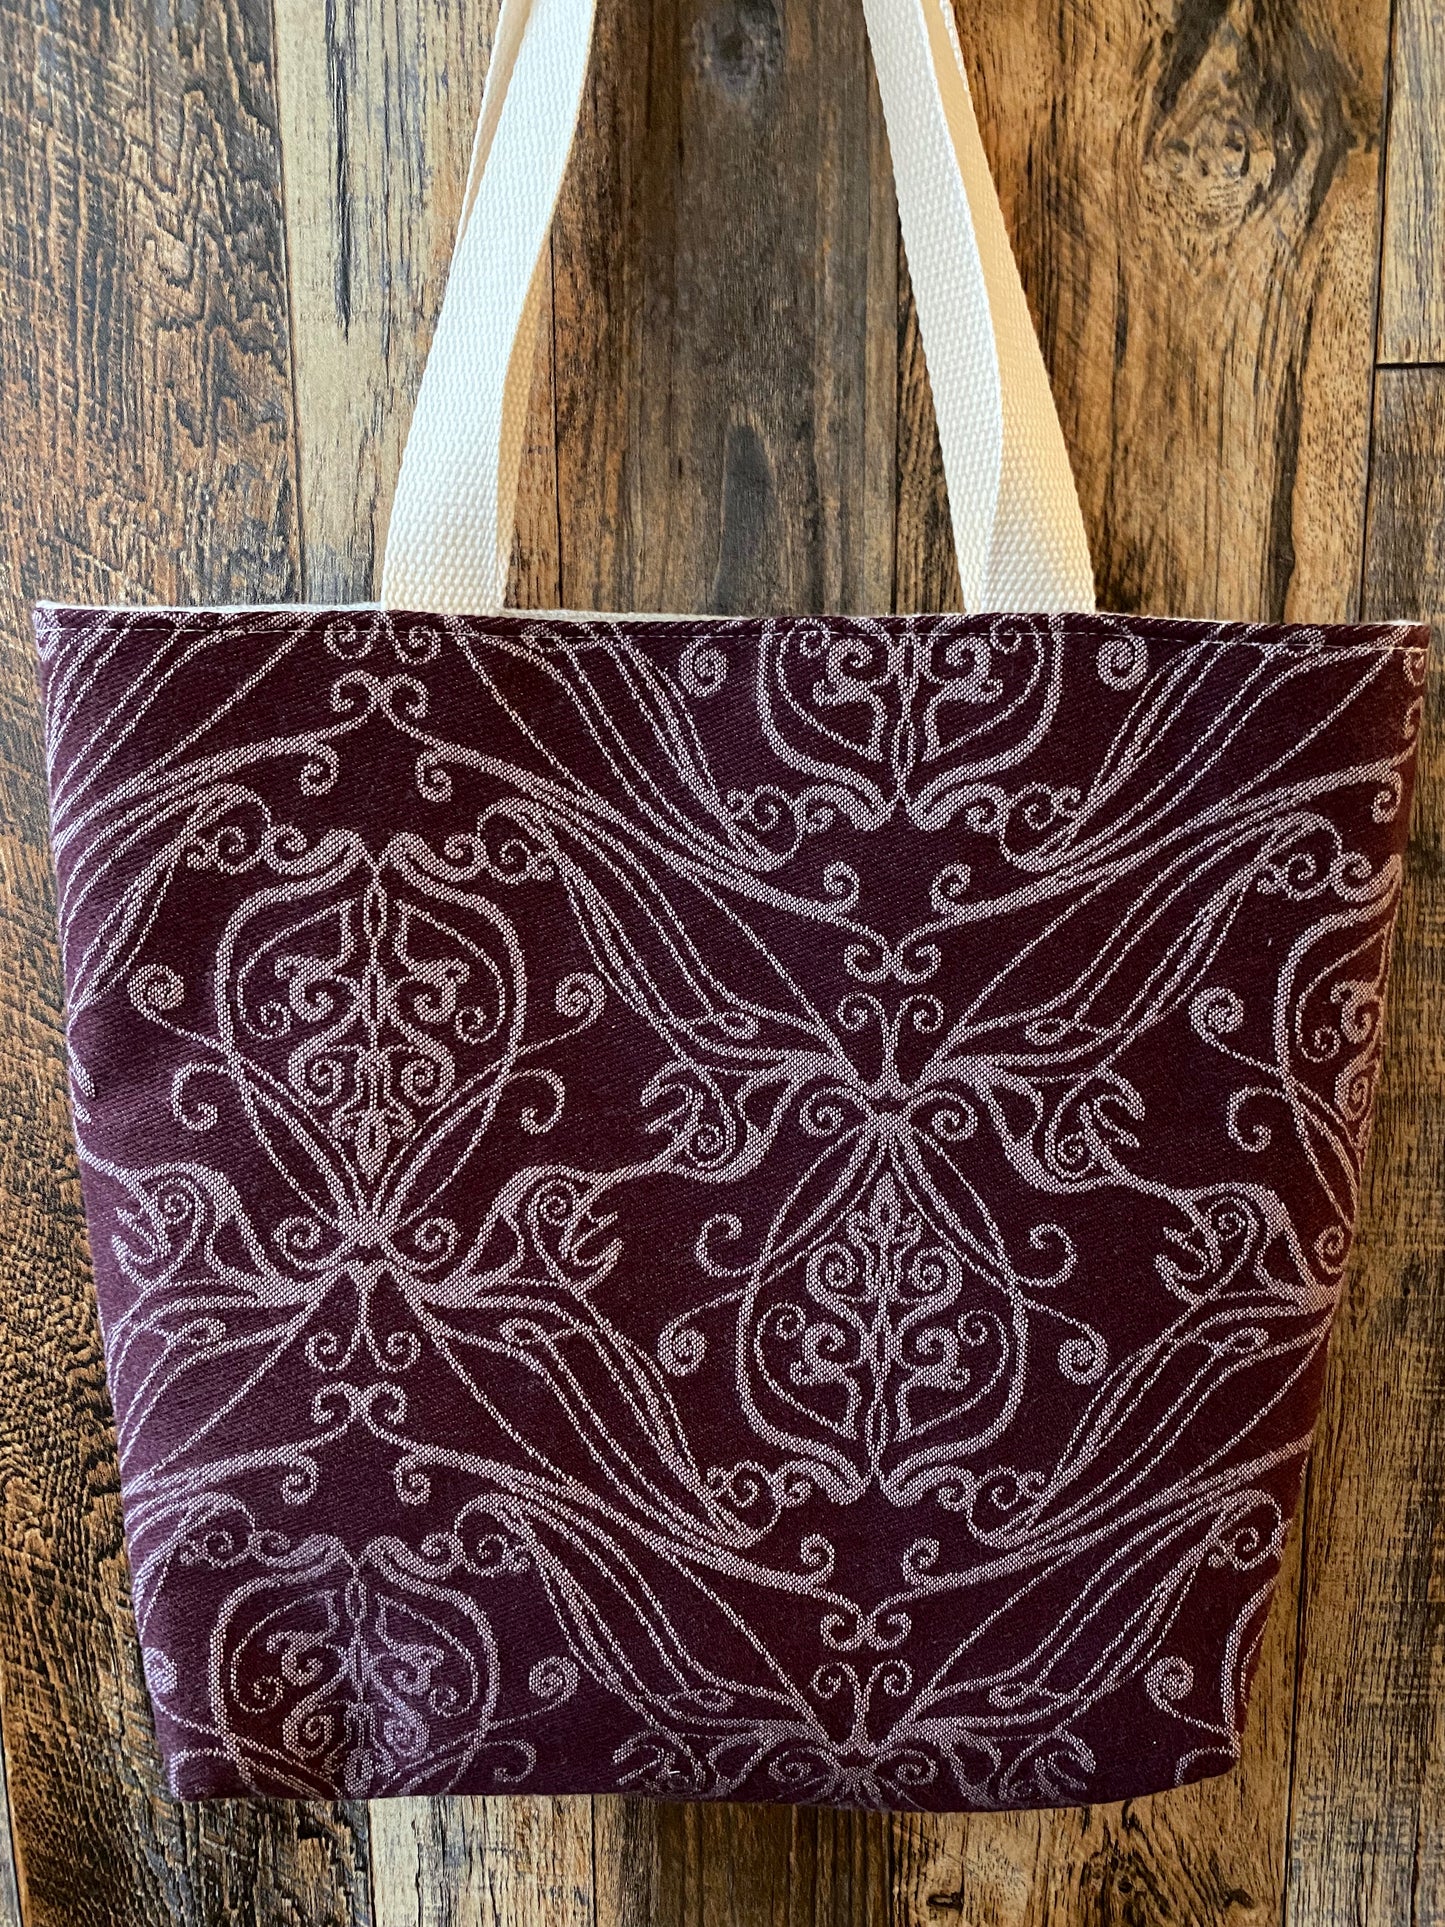 Merlot and Rose Enthralled Reader Library Tote Bag